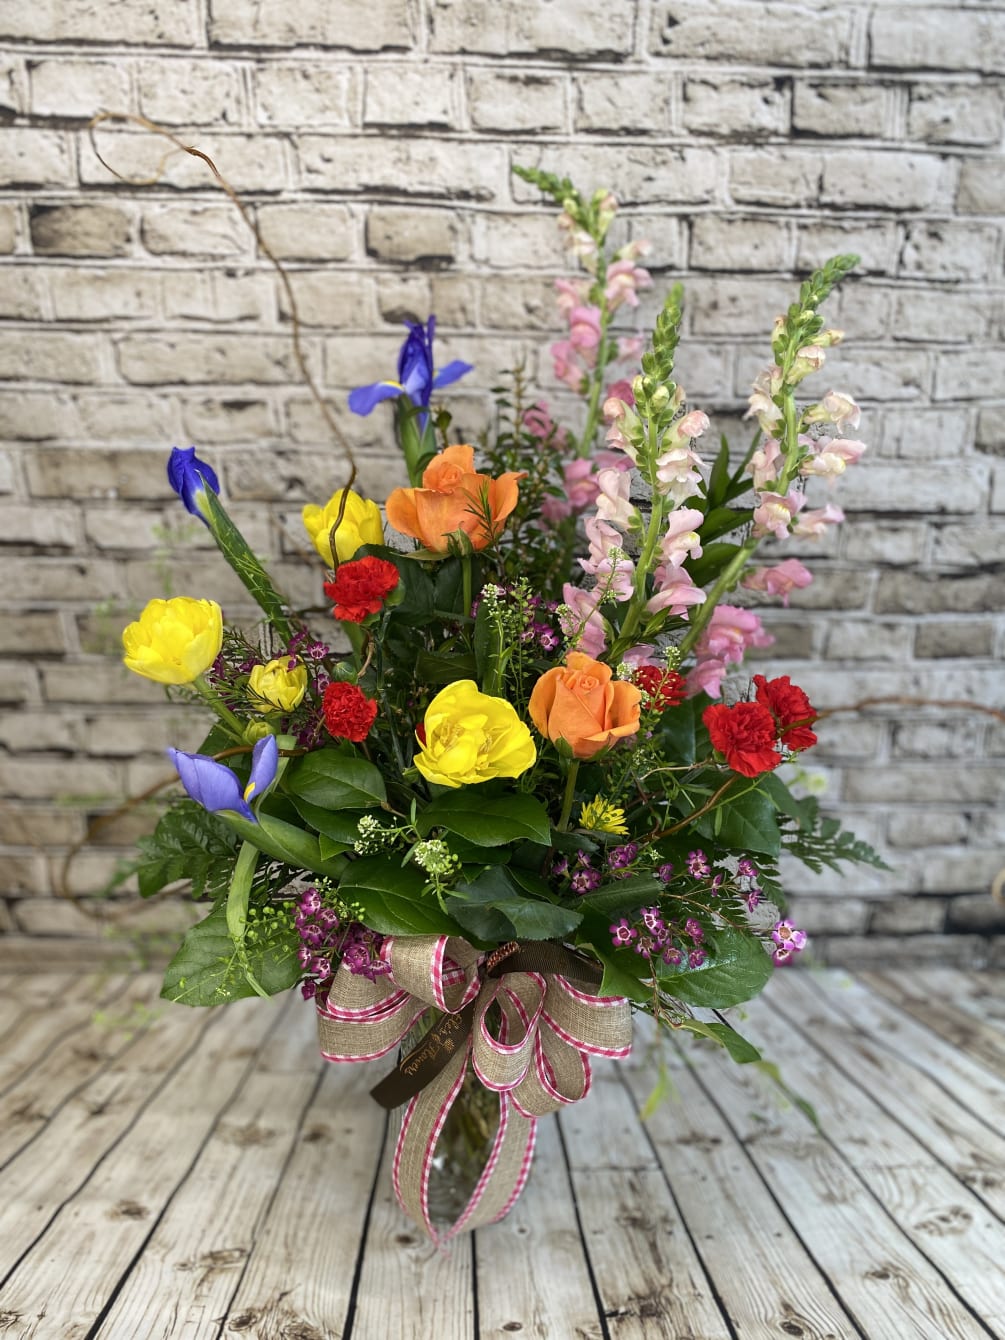 Our Rainbow arrangement incorporates everything we love about color all in one